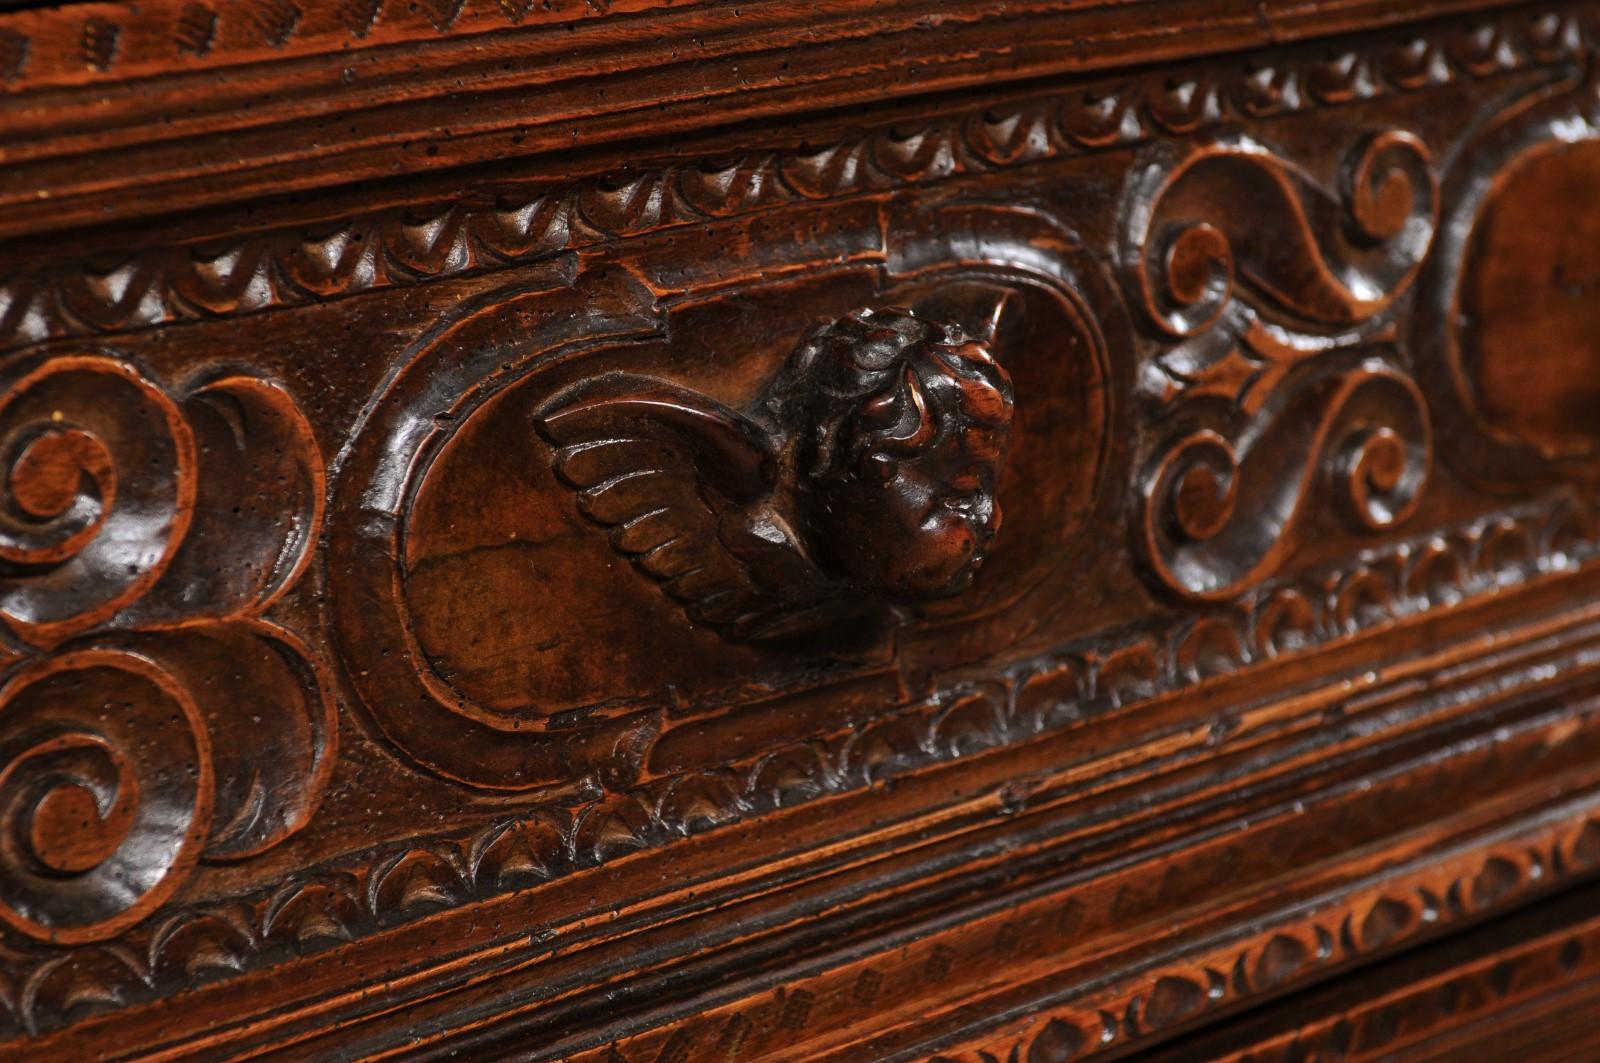 Walnut Early 18th C Italian Elaborately-Embellished Commode w/Putti Carved Drawer Pulls For Sale